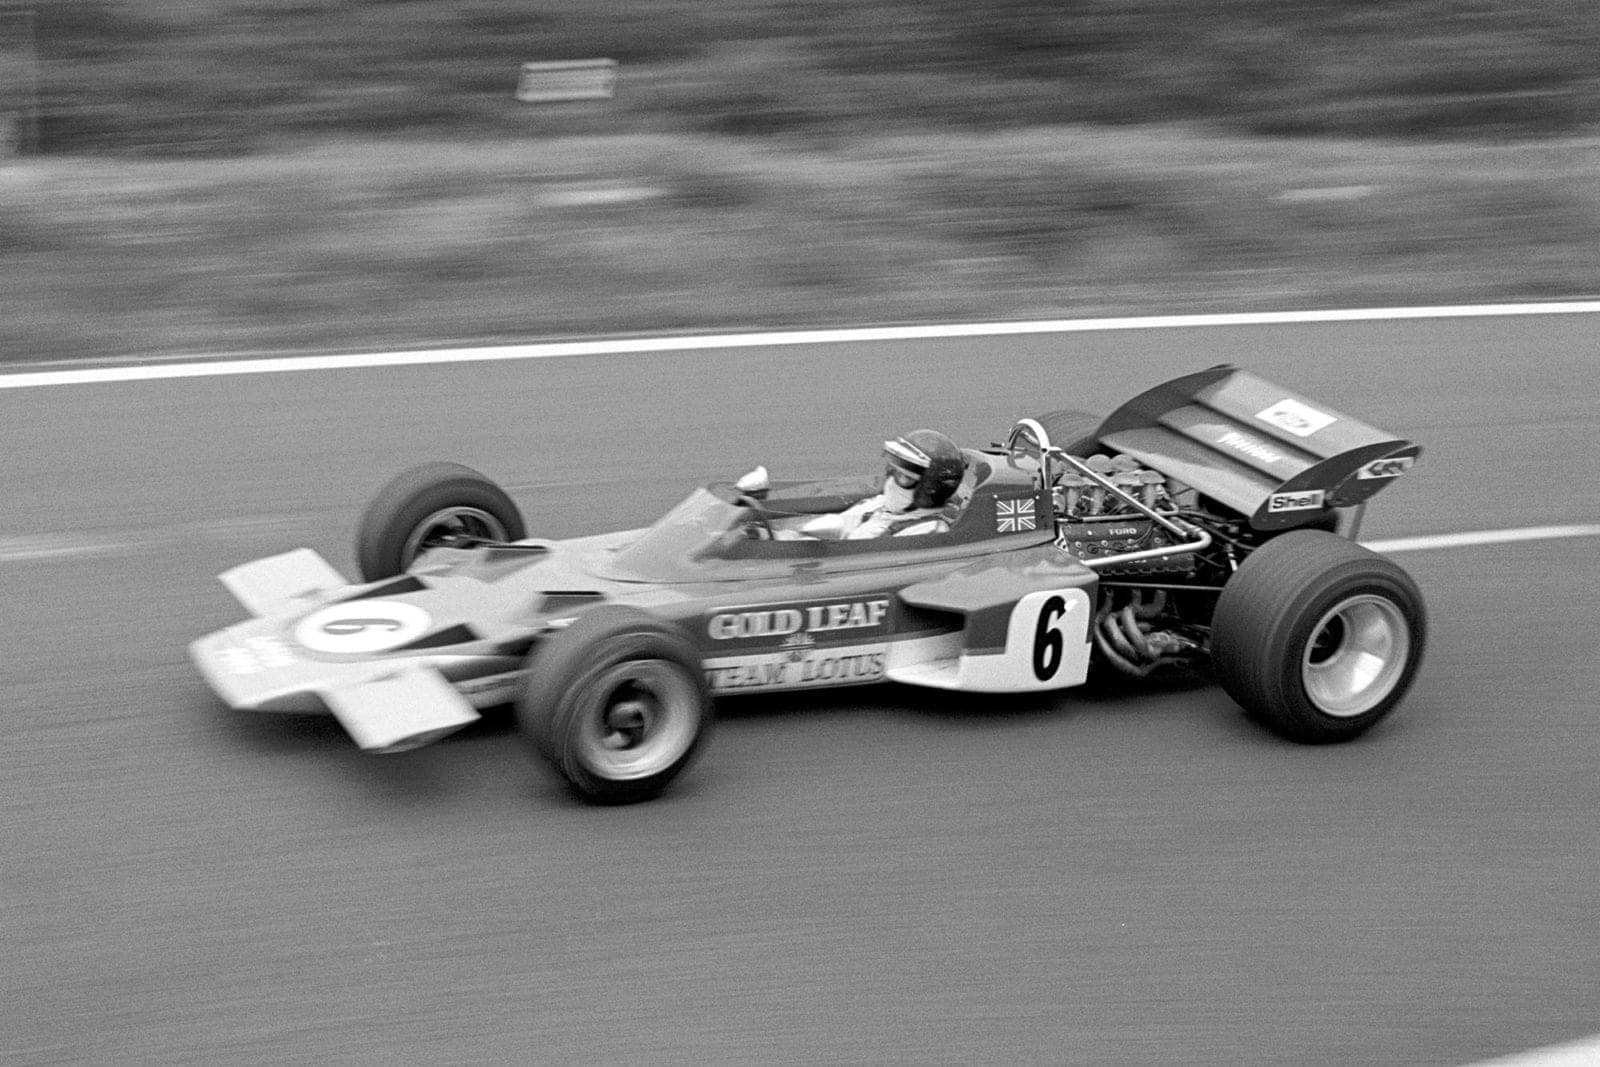 Jochen RIndt driving for Lotus at the 1970 French Grand Prix.